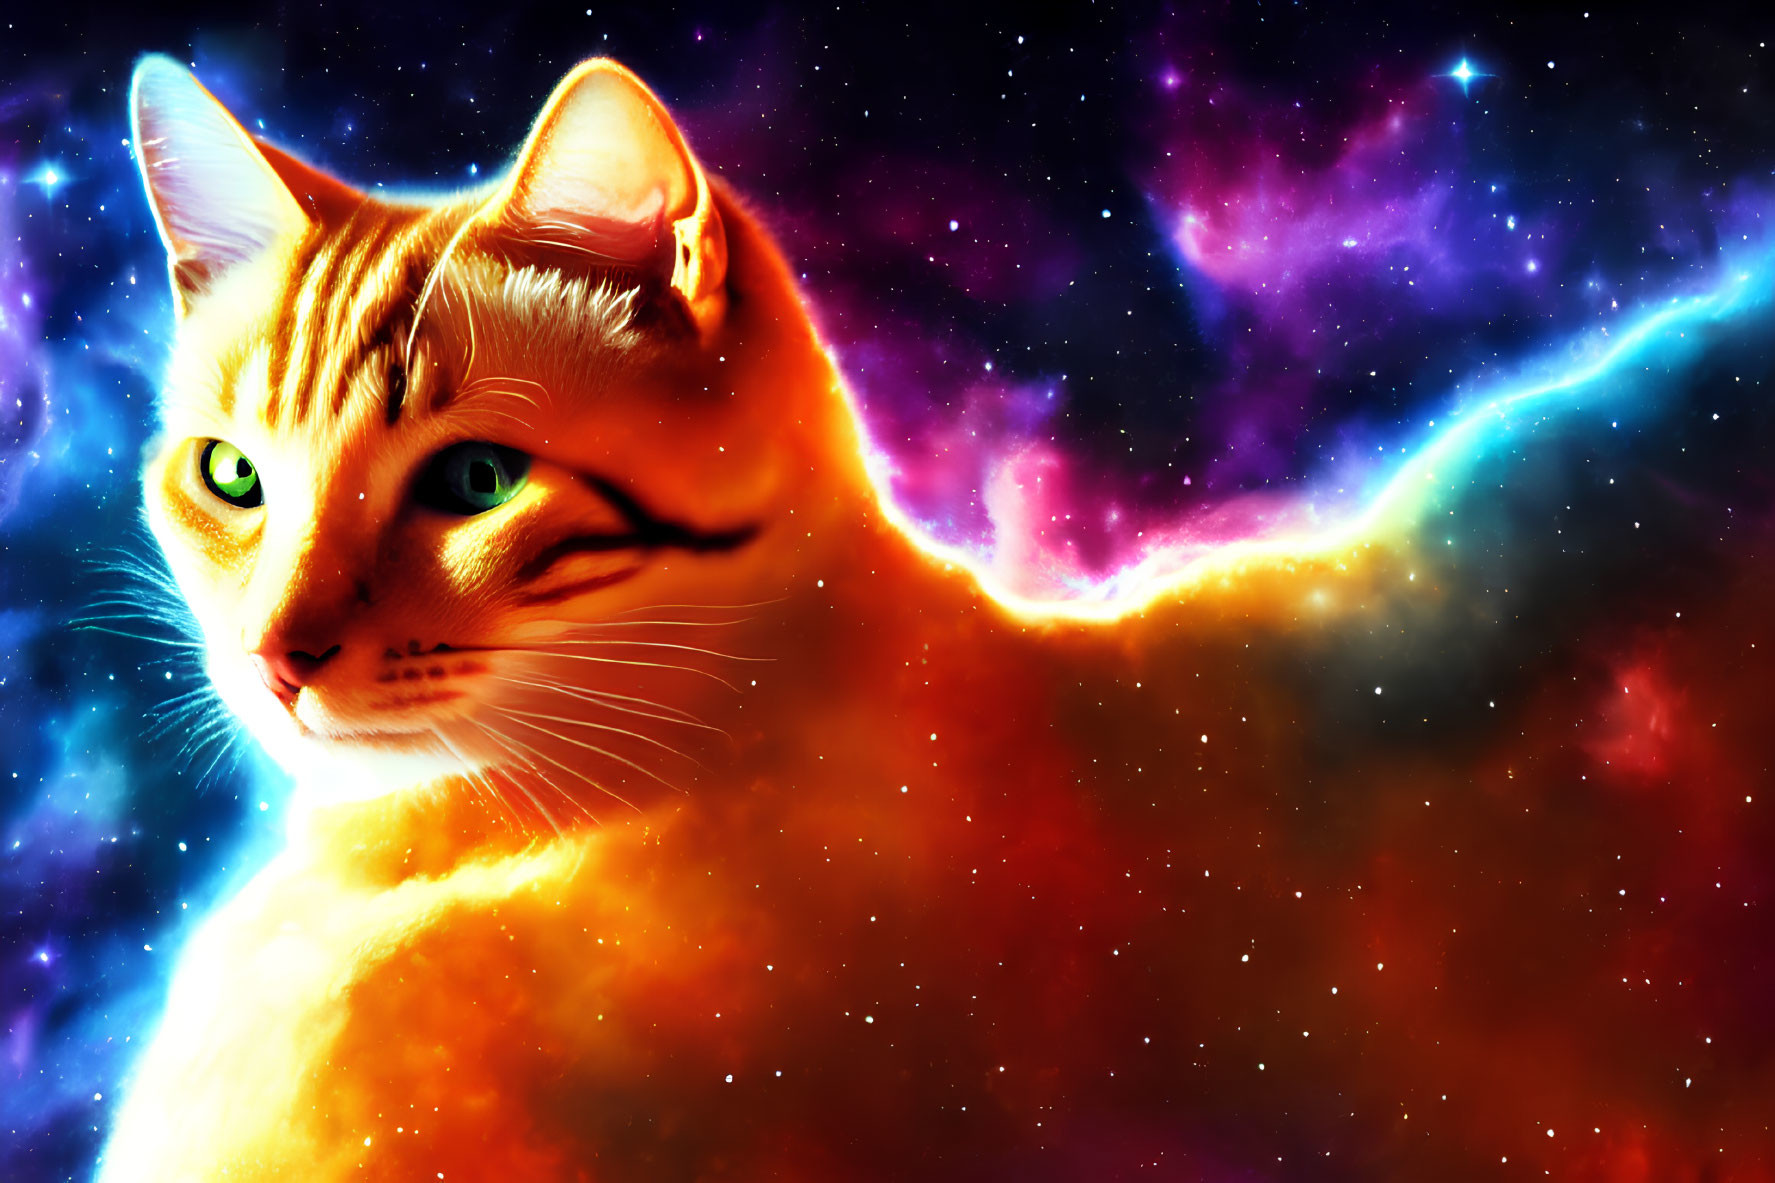 Majestic cat with galaxy-themed fur in cosmic setting